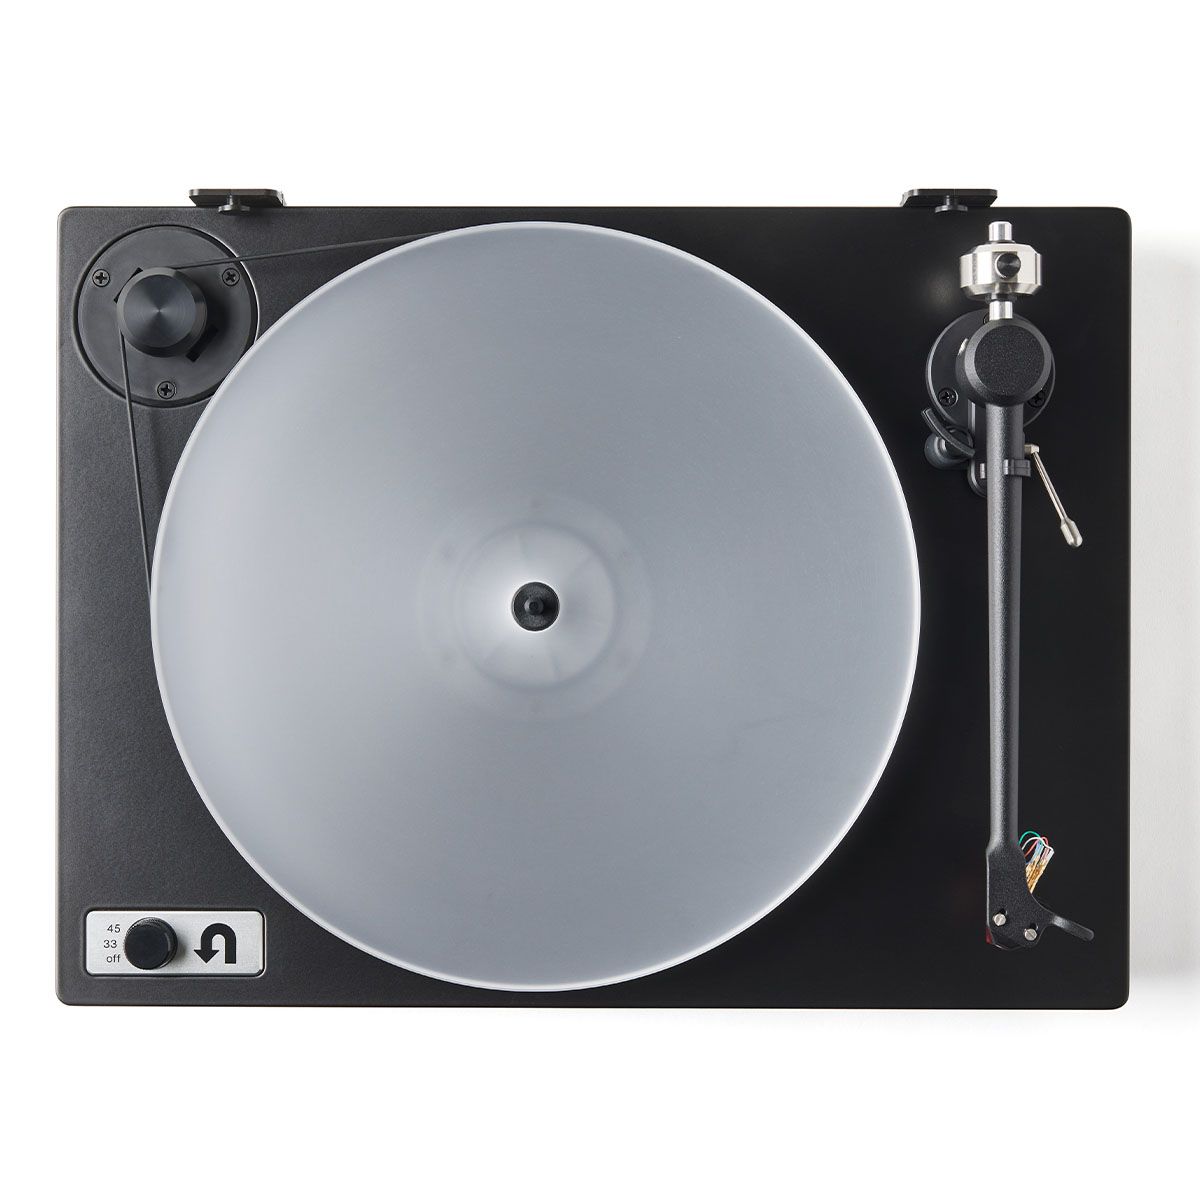 U-Turn Audio Orbit 2 Special Turntable photographed from the top in black